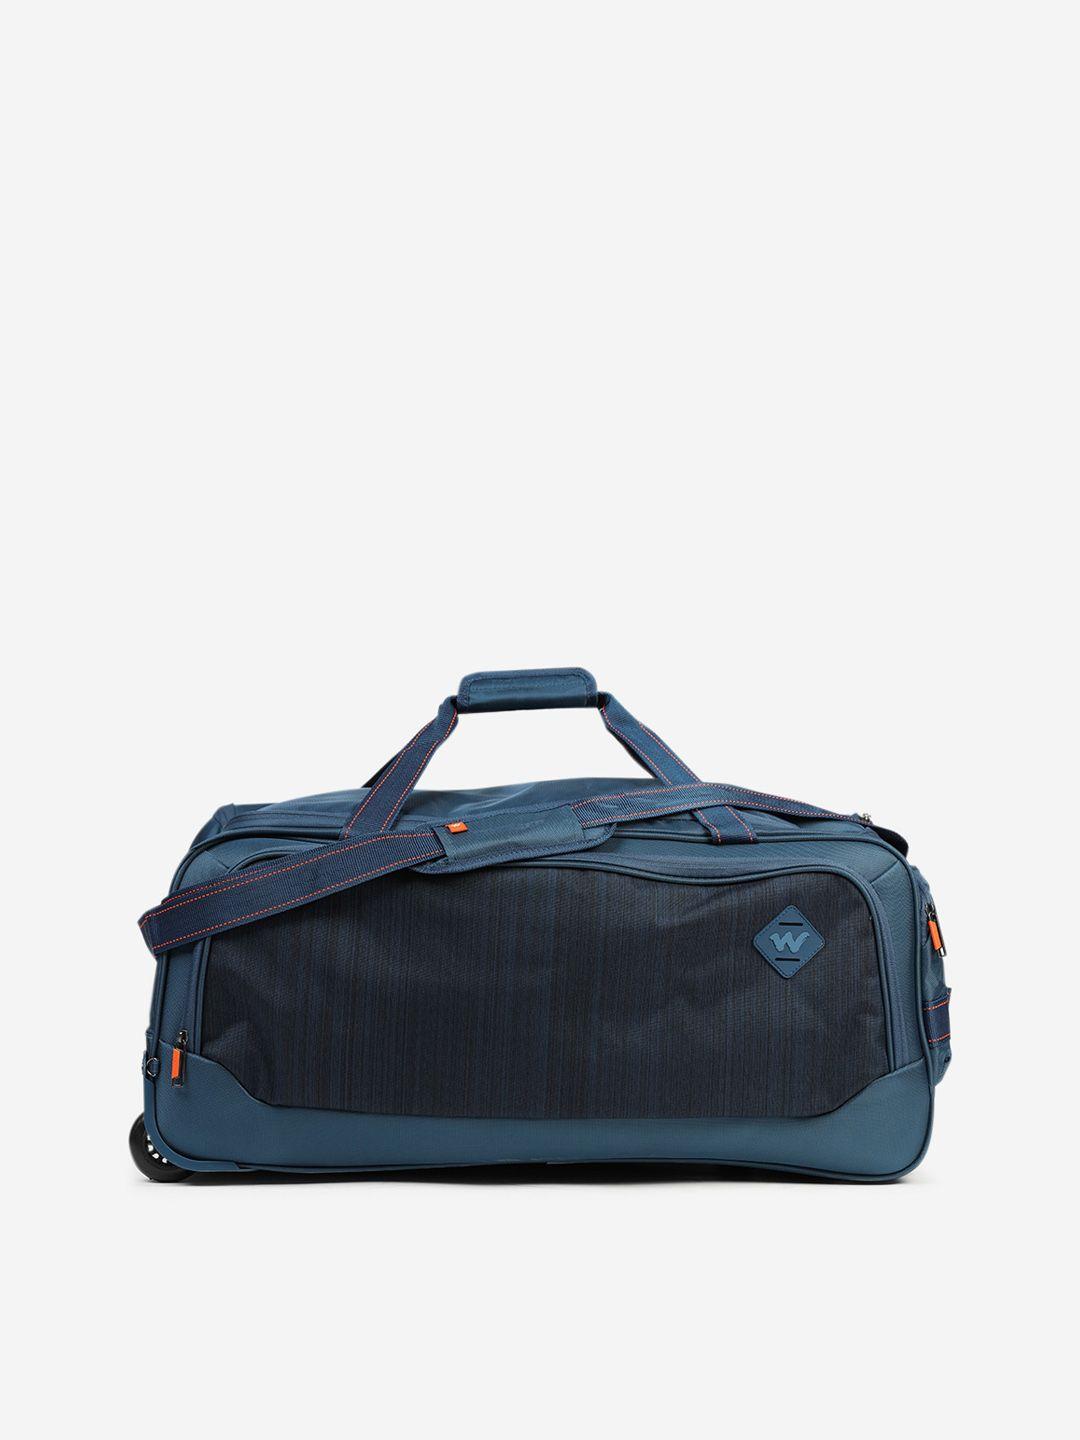 wildcraft teal blue textured soft-sided large duffel trolley bag